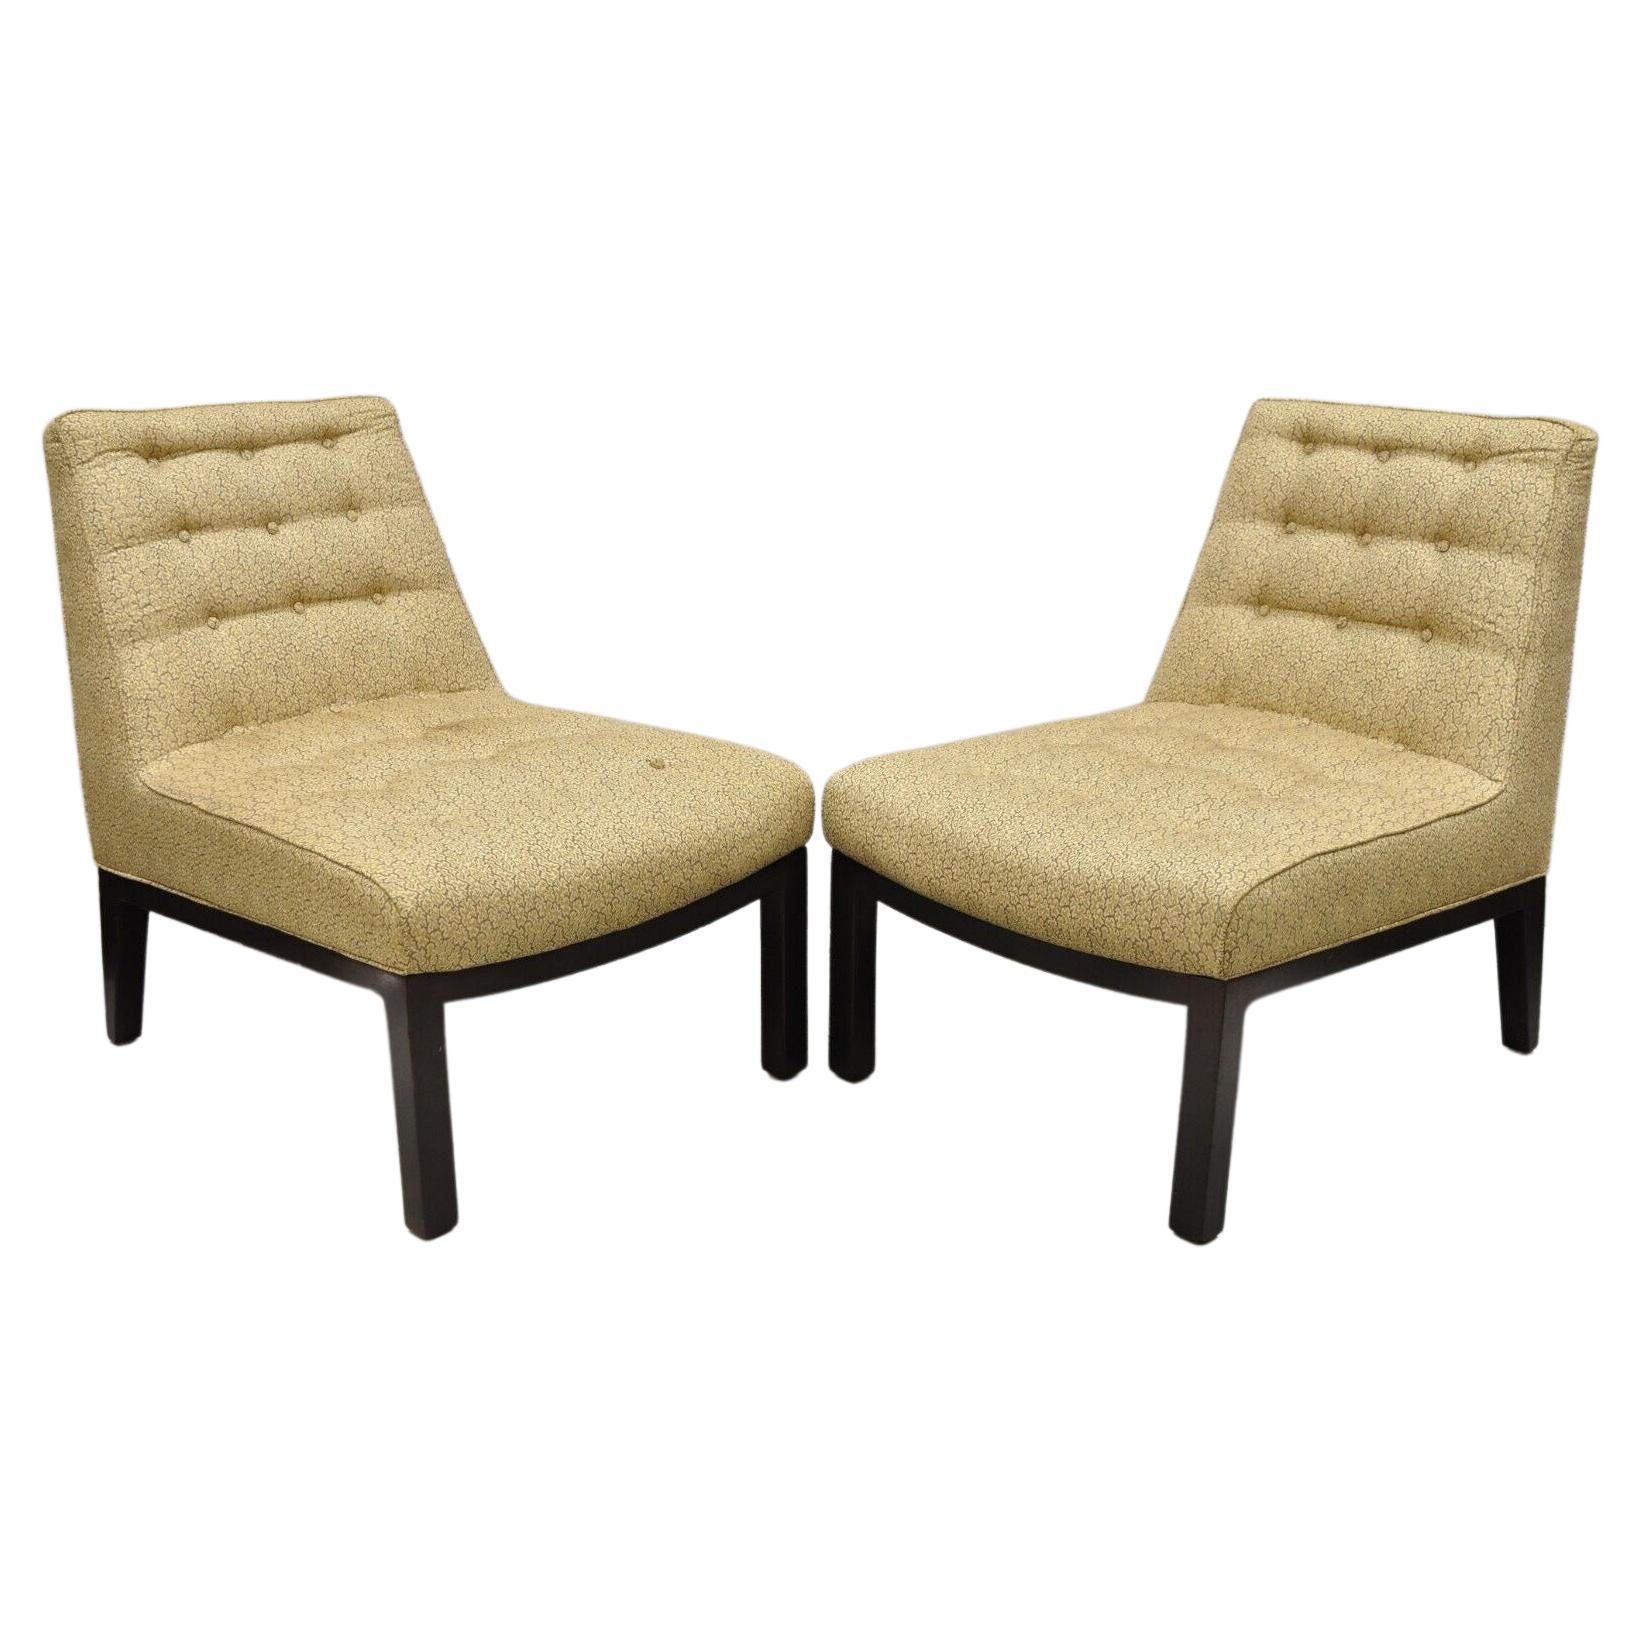 Edward Wormley for Dunbar Wood Frame Slipper Lounge Chairs, a Pair For Sale